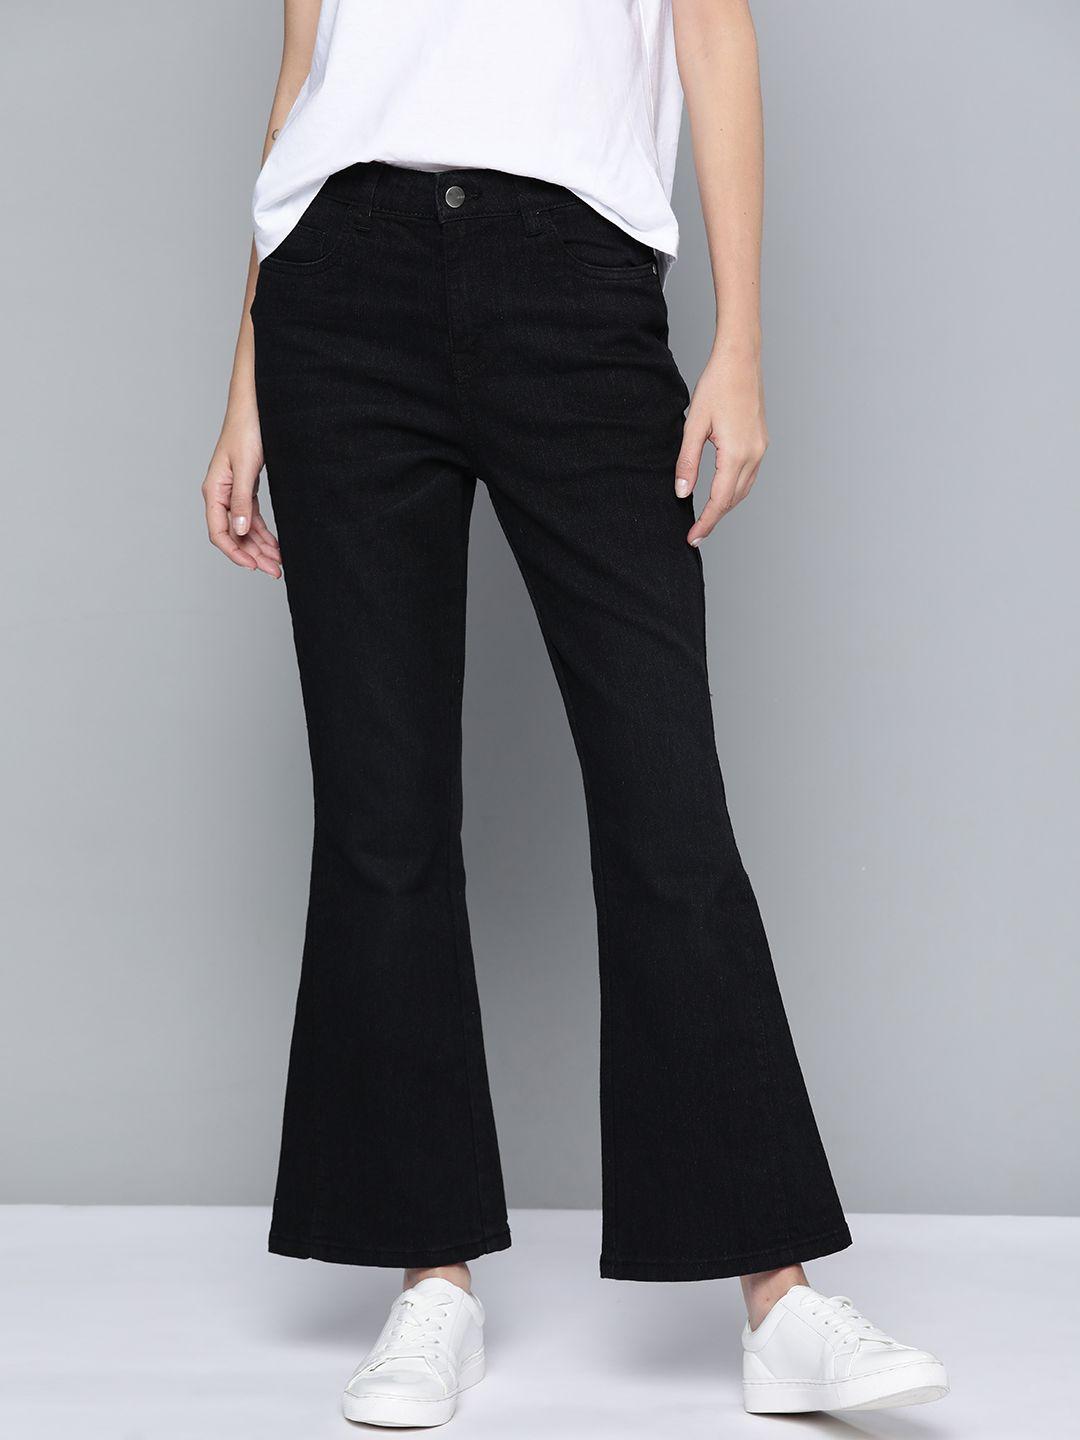 mast-&-harbour-women-black-flared-stretchable-jeans